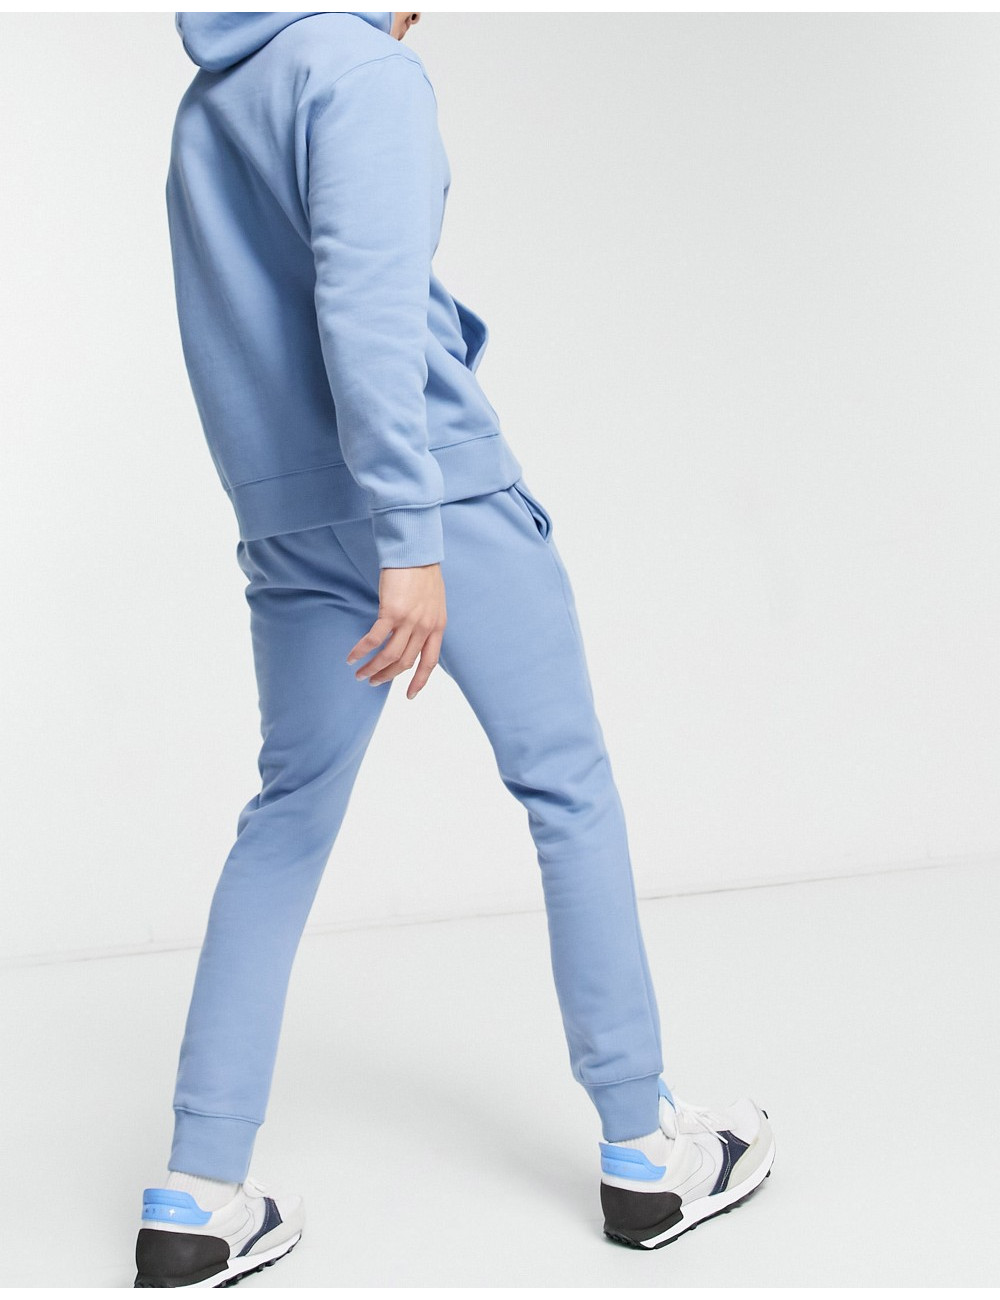 Topman co-ord jogger in blue